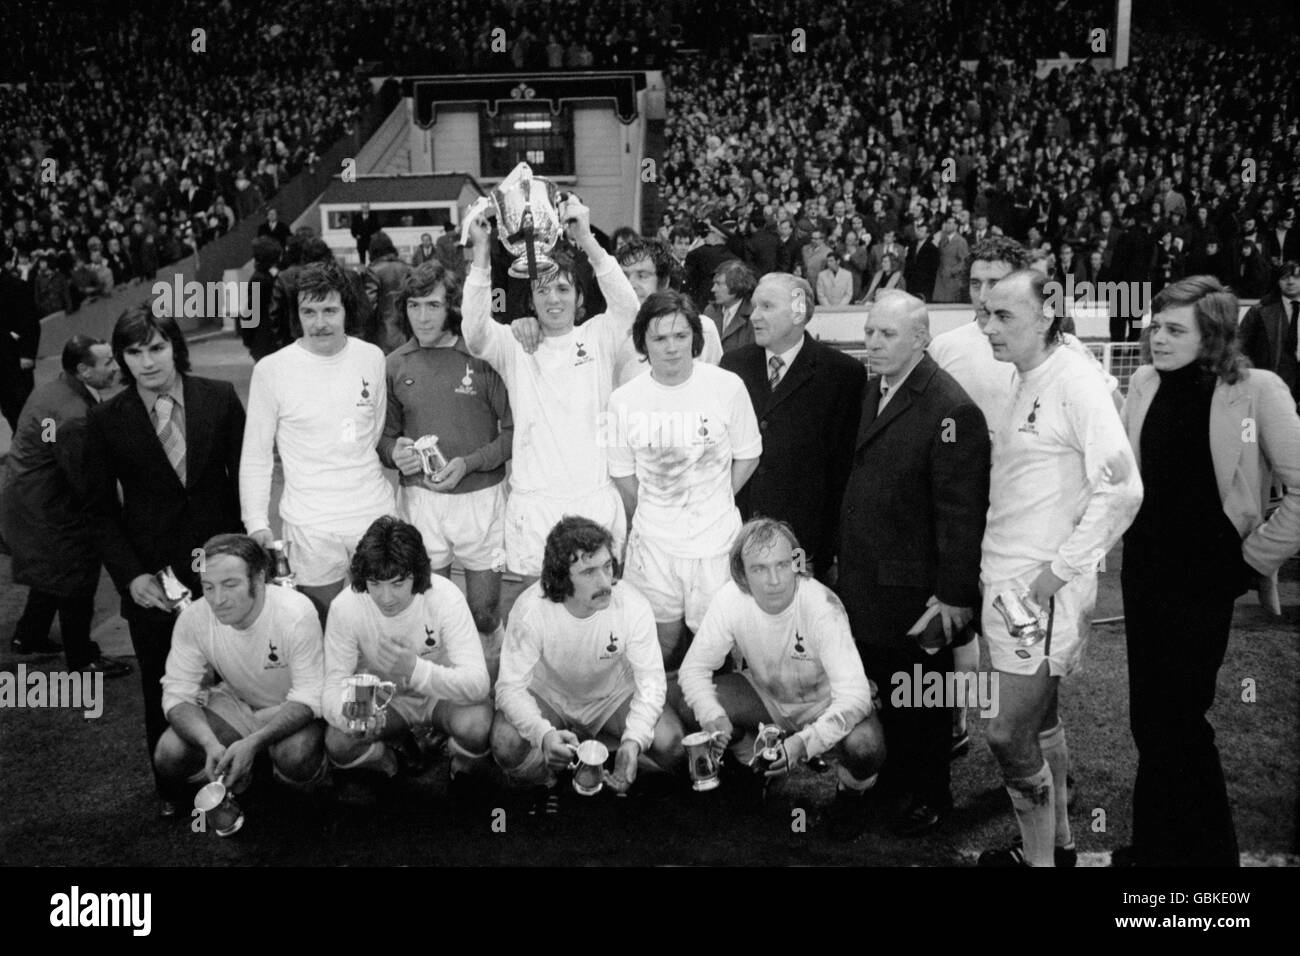 Tottenham Hotspur celebrate with the League Cup after their 1-0 win: (back row, l-r) John Pratt, Cyril Knowles, Pat Jennings, Martin Peters, Mike England, Steve Perryman, manager Bill Nicholson, ?, Martin Chivers, Alan Gilzean; (front row, l-r) Ralph Coates, Joe Kinnear, Terry Naylor, Phil Beal Stock Photo